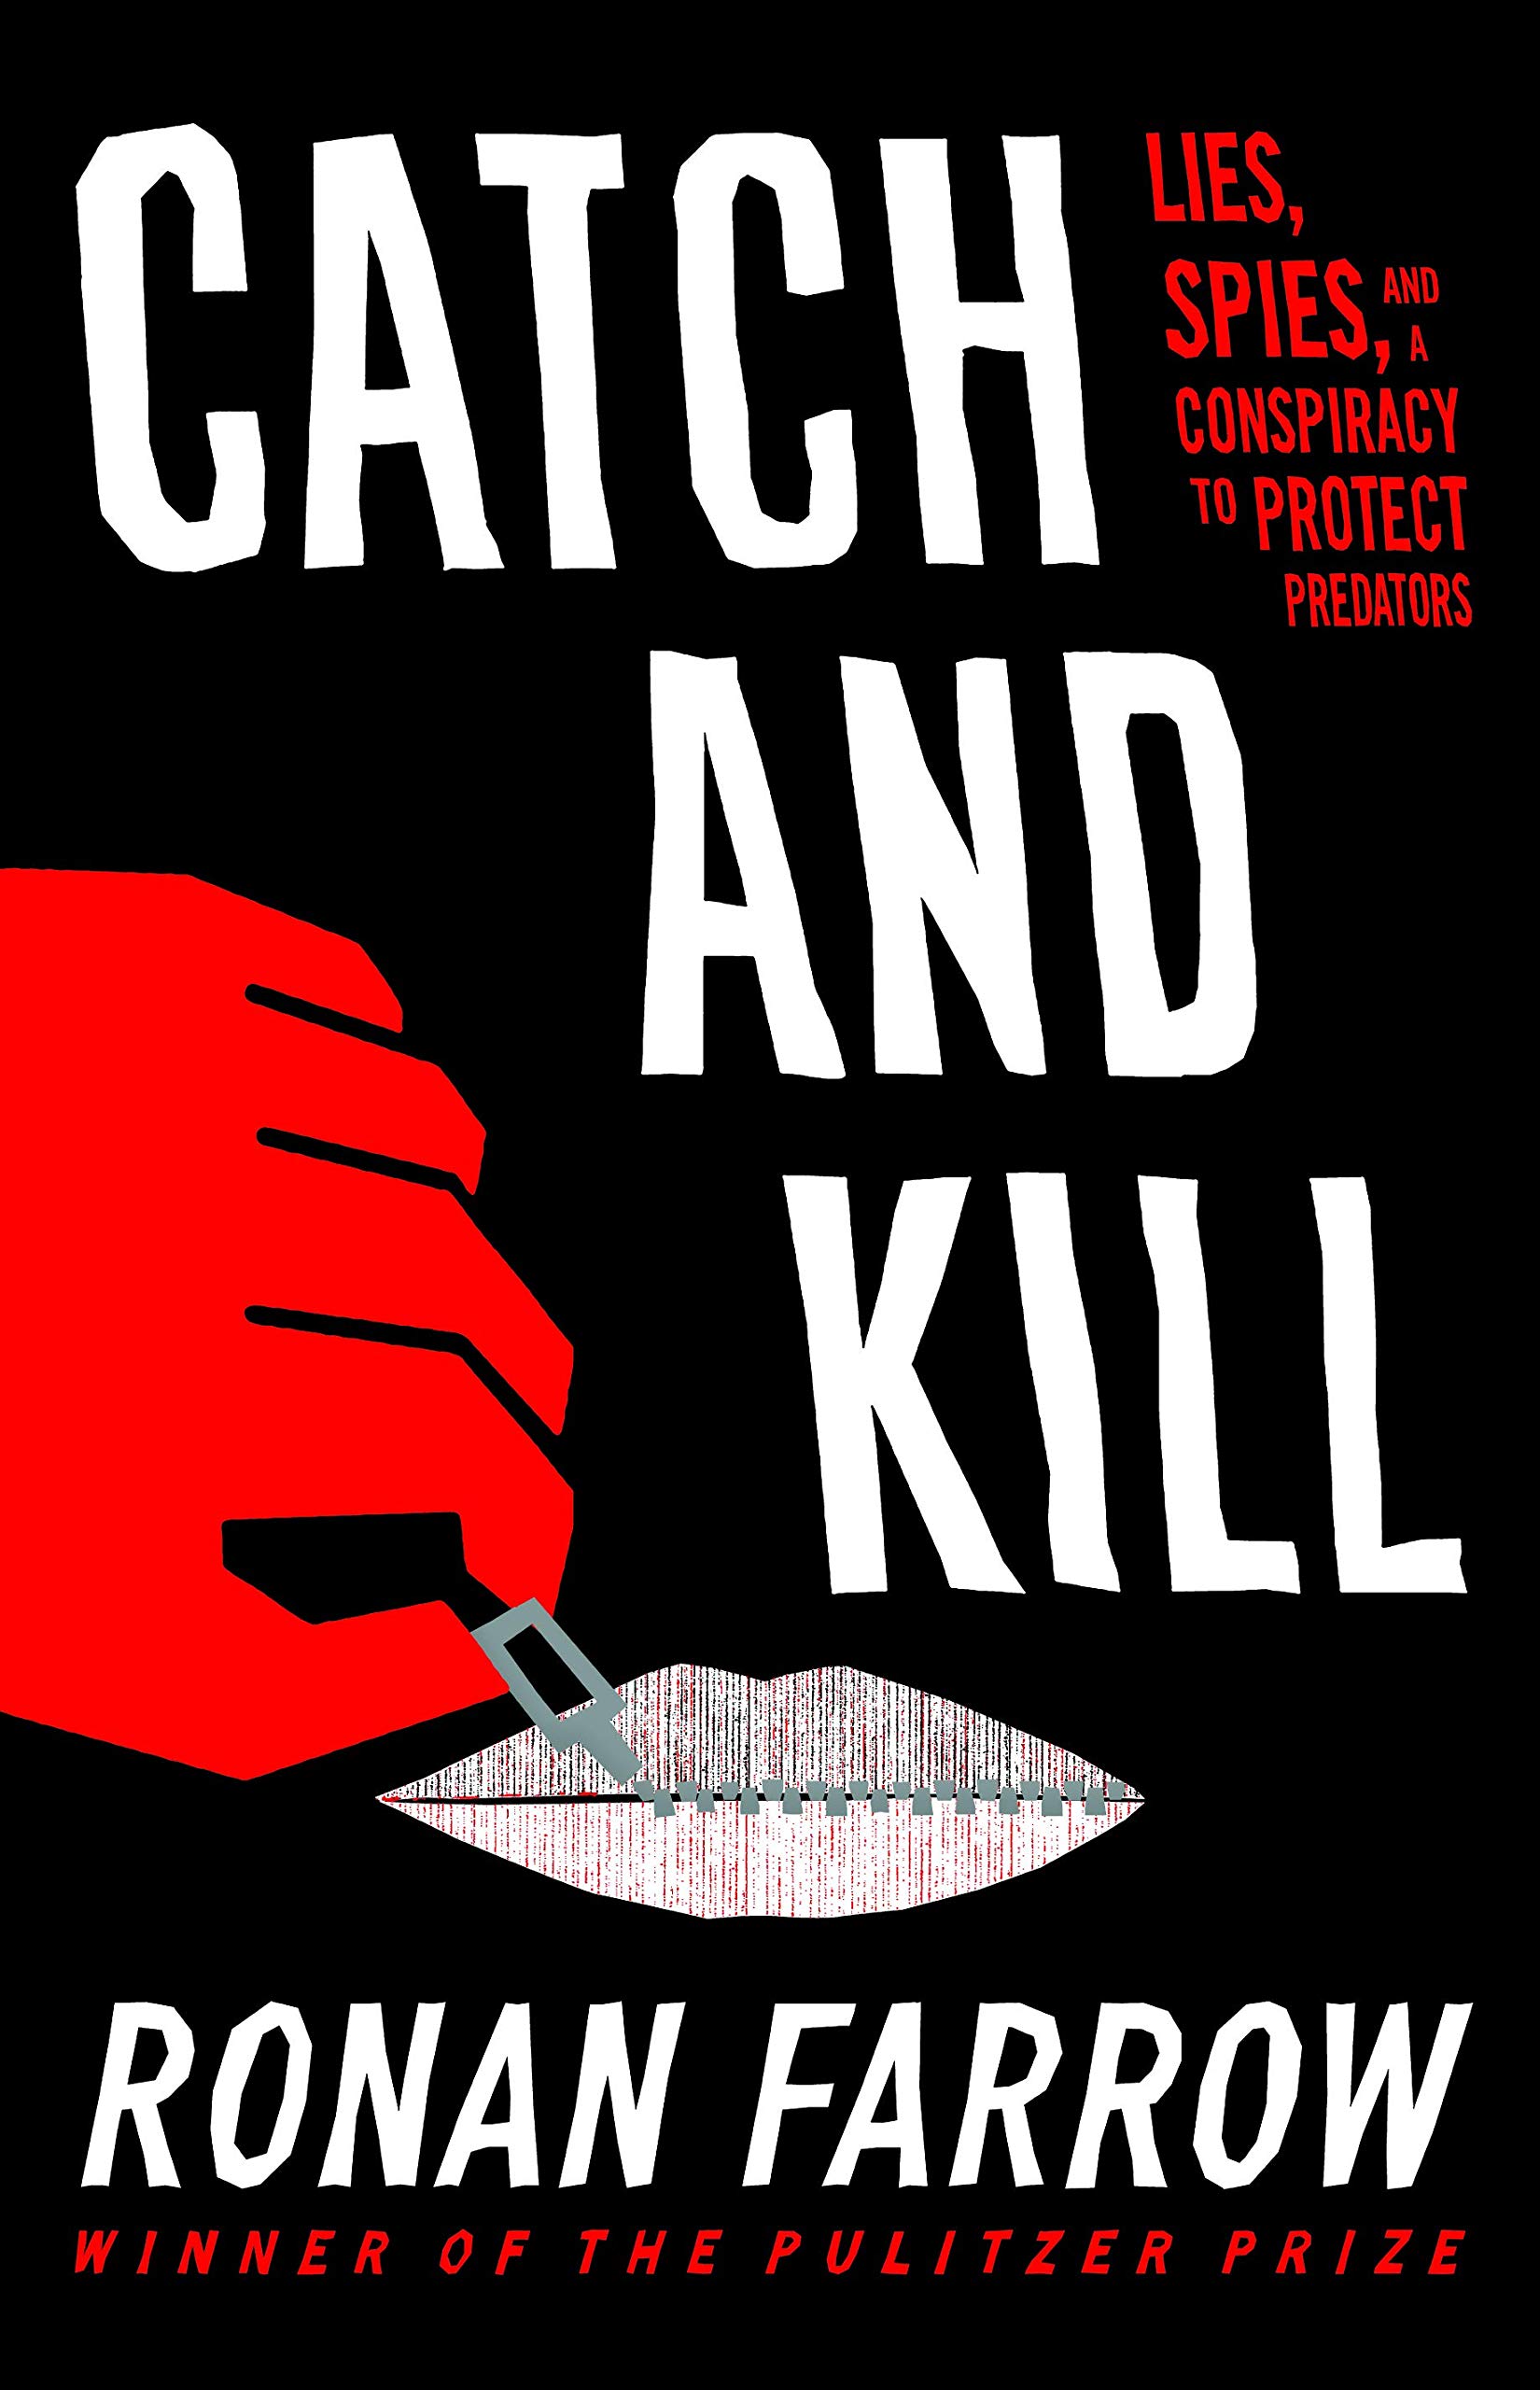 Image for "Catch and Kill"